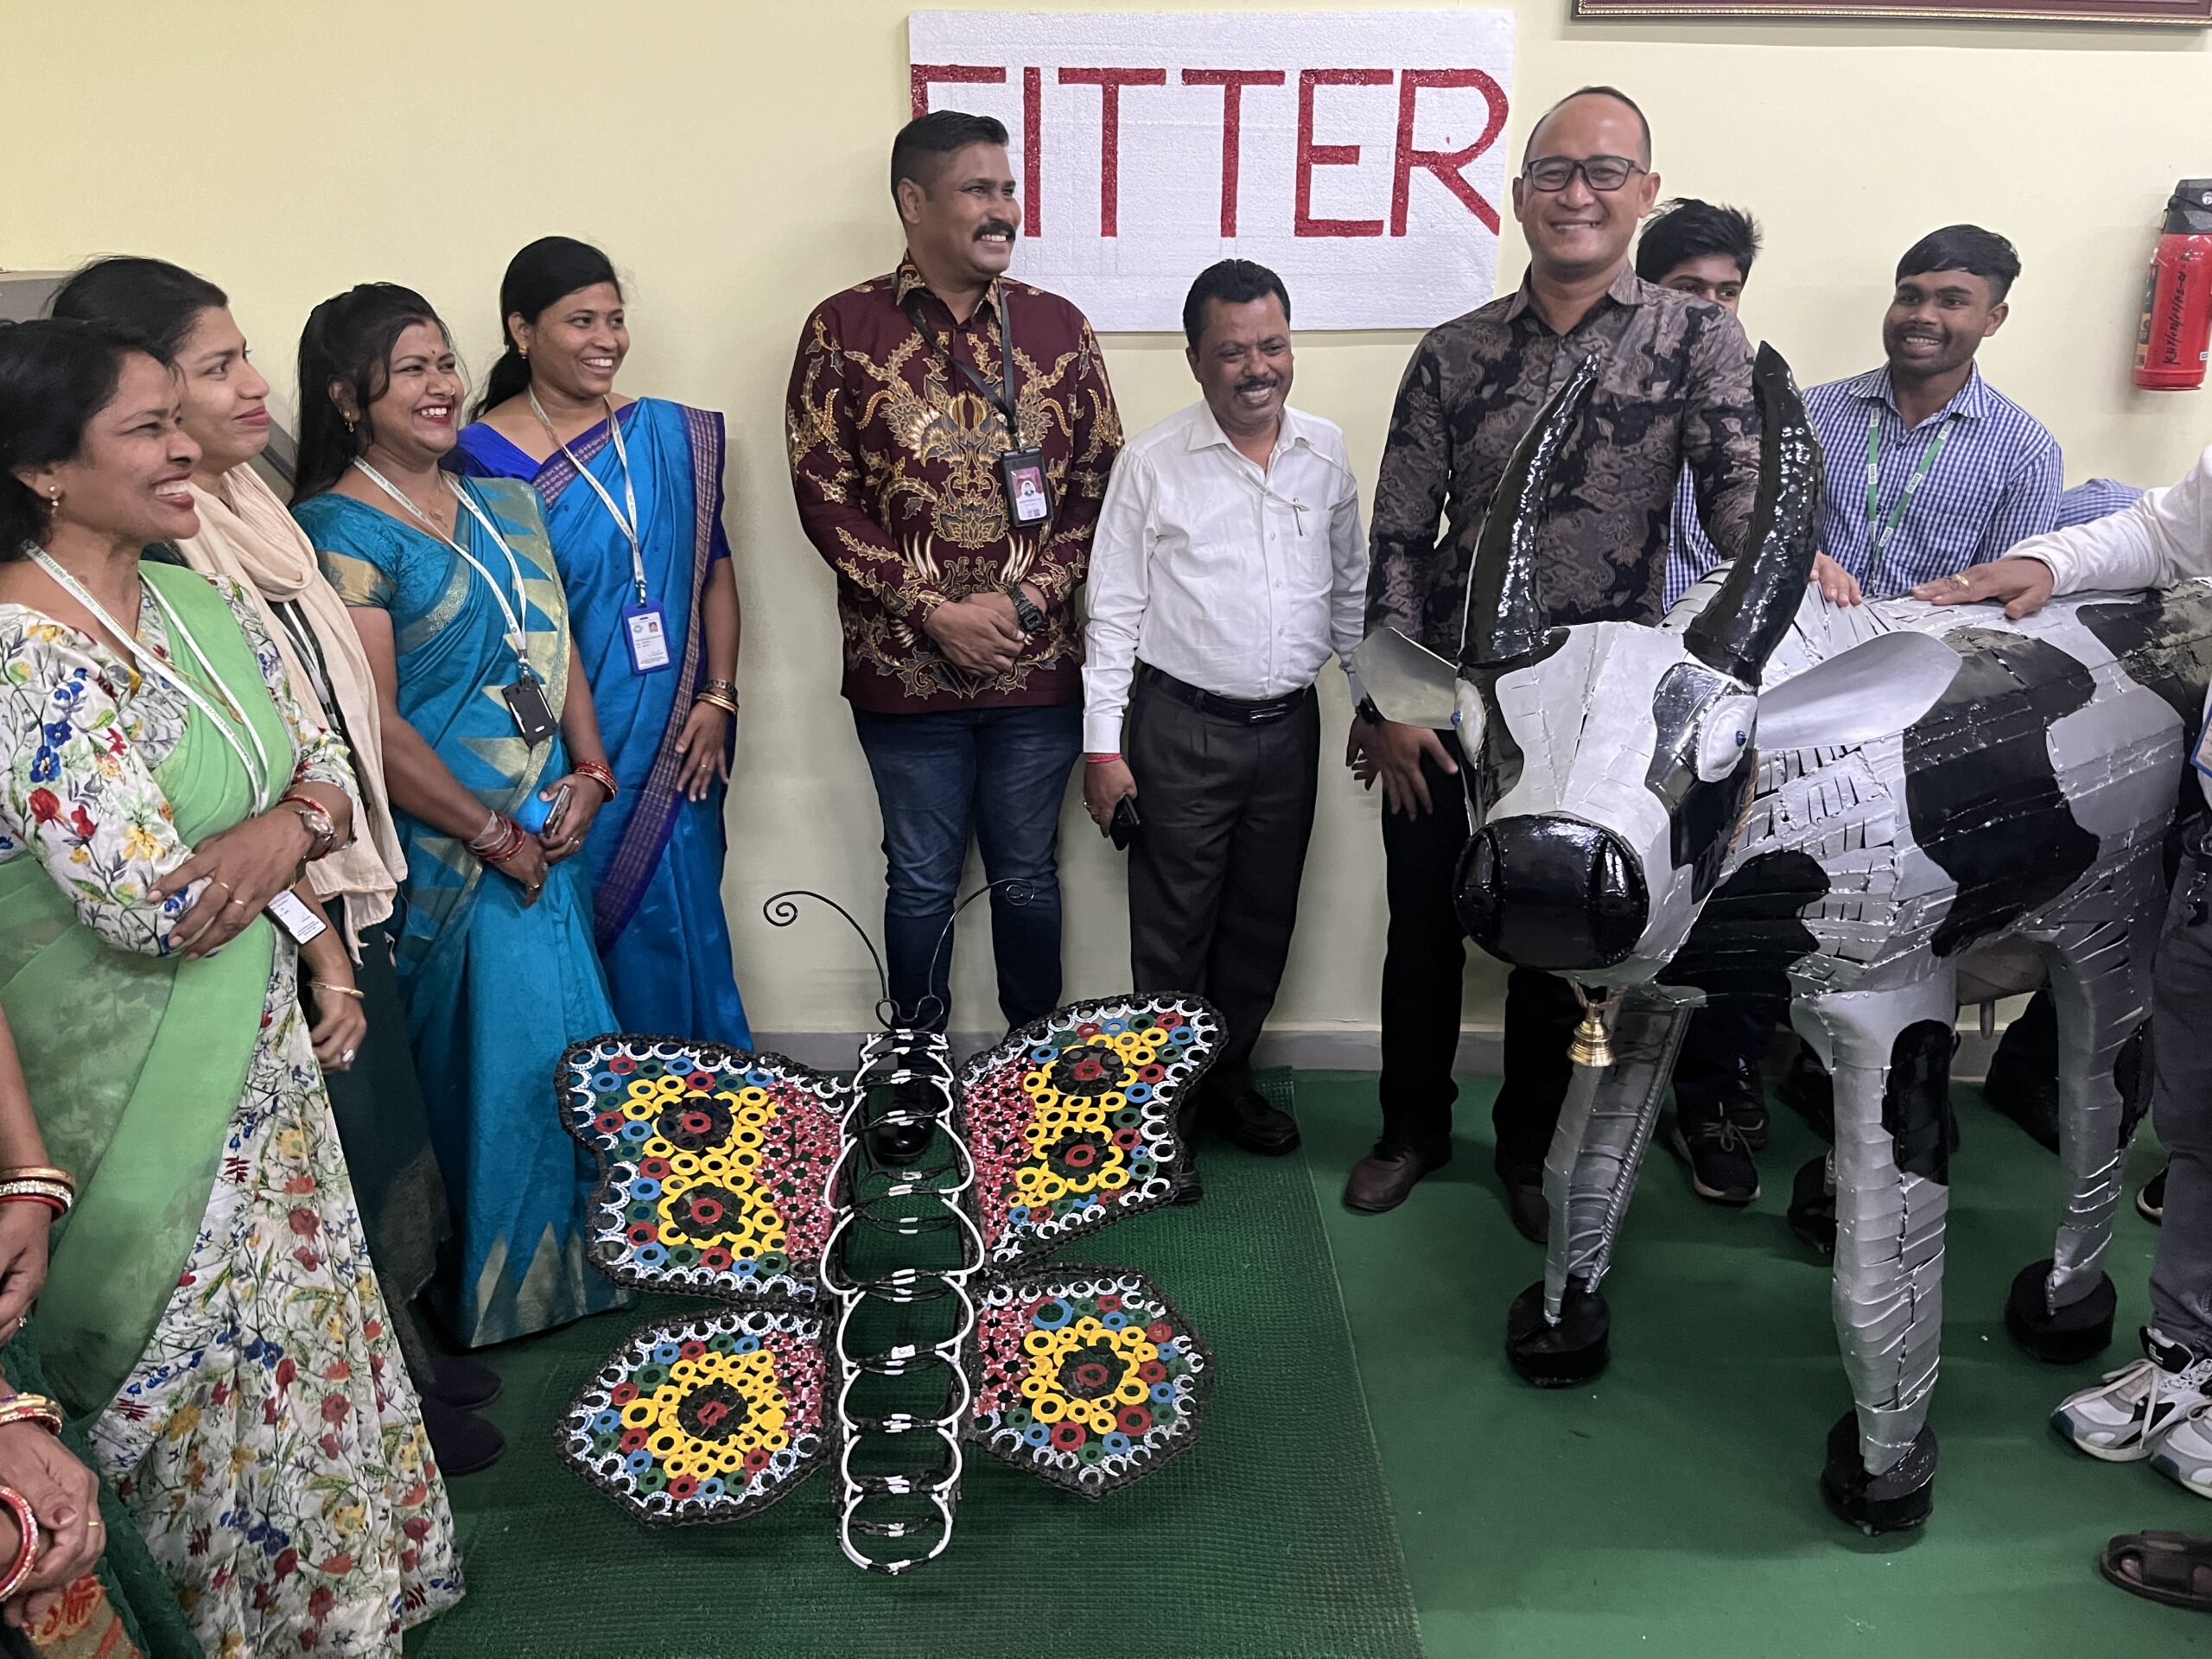 KIIT-ITI hosted a two-day Technical Expo from February 22nd to 23rd, 2024, aimed at enriching the students' knowledge and skills while showcasing their abilities. The event was graced by Shri R. N. Dash, Secretary, KIIT & KISS; Prof. J. R. Mohanty, Registrar, KIIT-DU, and Prof. S. C. Swain, Principal, KIIT-ITI, along with other senior functionaries of KIIT University. During the expo, the Secretary KIIT & KISS commended the efforts of KIIT-ITI's staff and students for their innovative ideas and societal impacts. Prof. J. R. Mohanty shared valuable insights into the school's progress and offered motivating words of advice to the students, emphasizing the importance of practical exposure and skills development. The Technical Expo also saw the esteemed delegation from Nusa Putra University (Indonesia) visiting the campus, where they praised the students' efforts and encouraged them to continue exploring innovative ideas and honing their skills. At the outset of the event, the Principal, KIIT-ITI extended a warm welcome to all the esteemed dignitaries and expressed gratitude to the staff and students for their tireless efforts in making the Technical Expo 2024 a resounding success. Such initiatives not only showcase the talent and dedication of the KIIT-ITI community but also foster a culture of innovation and excellence within the institution.